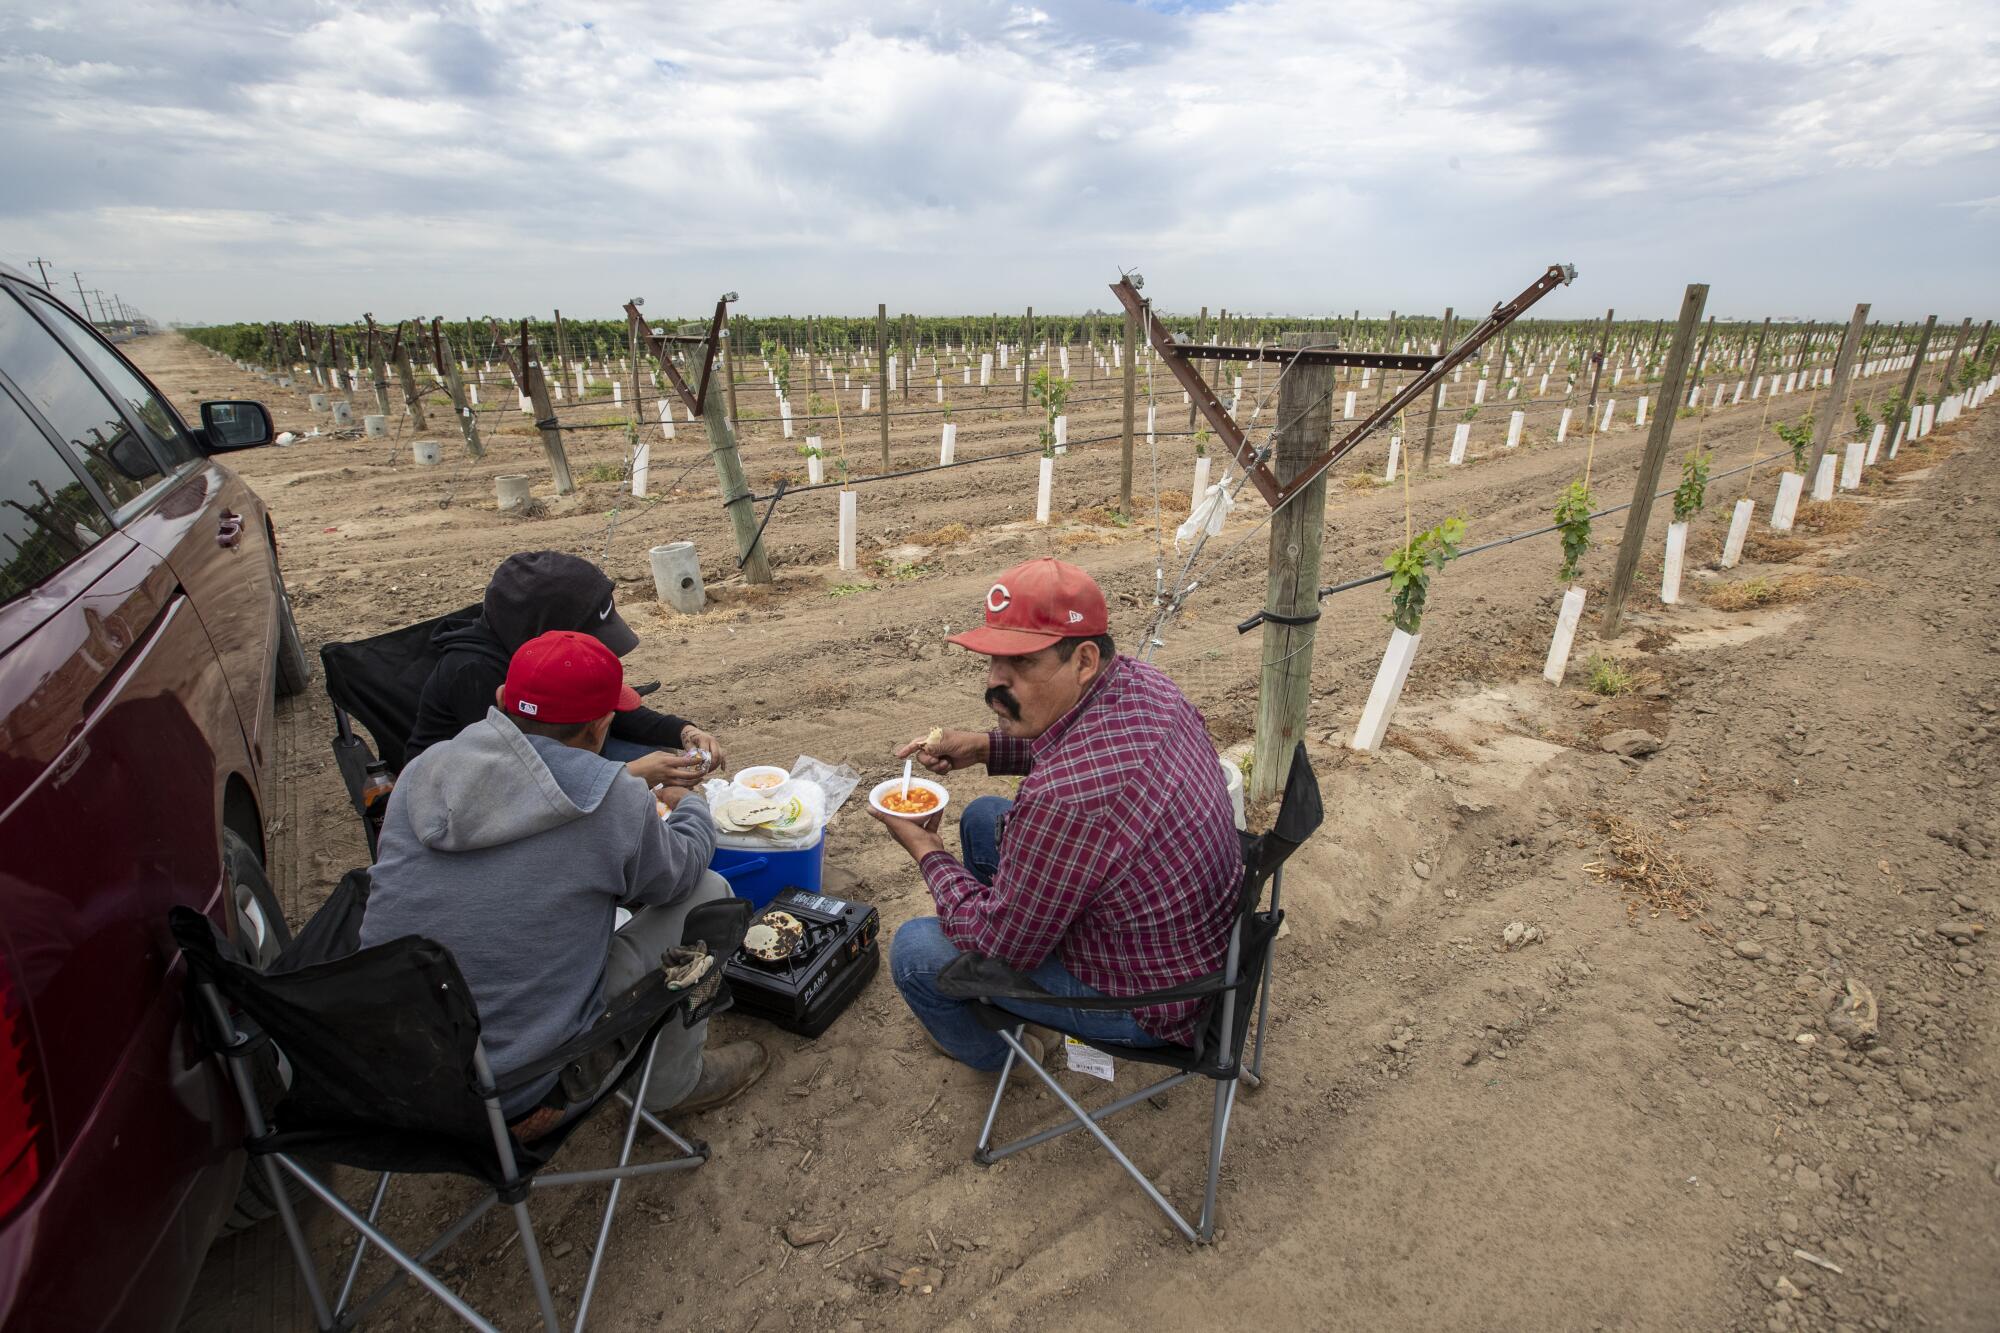 Farmworkers having lunch in a field on Thursday in Delano, Calif.